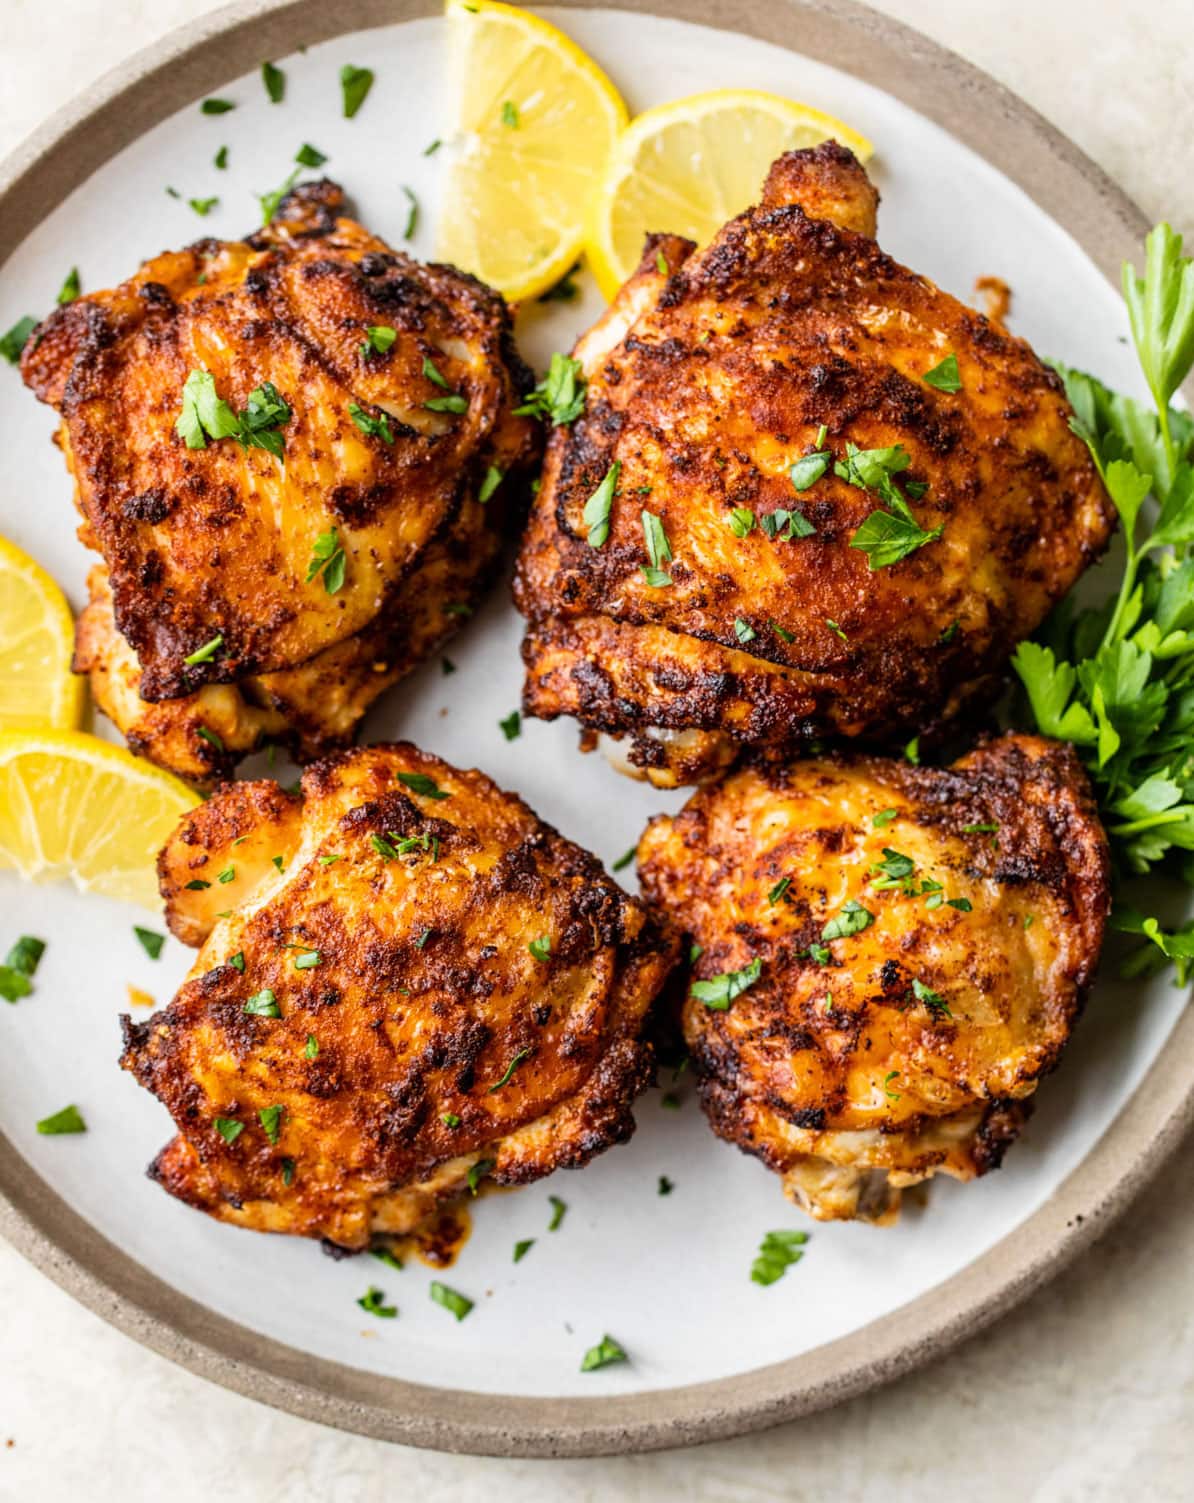 Four air fryer chicken thighs on a plate with lemon slices